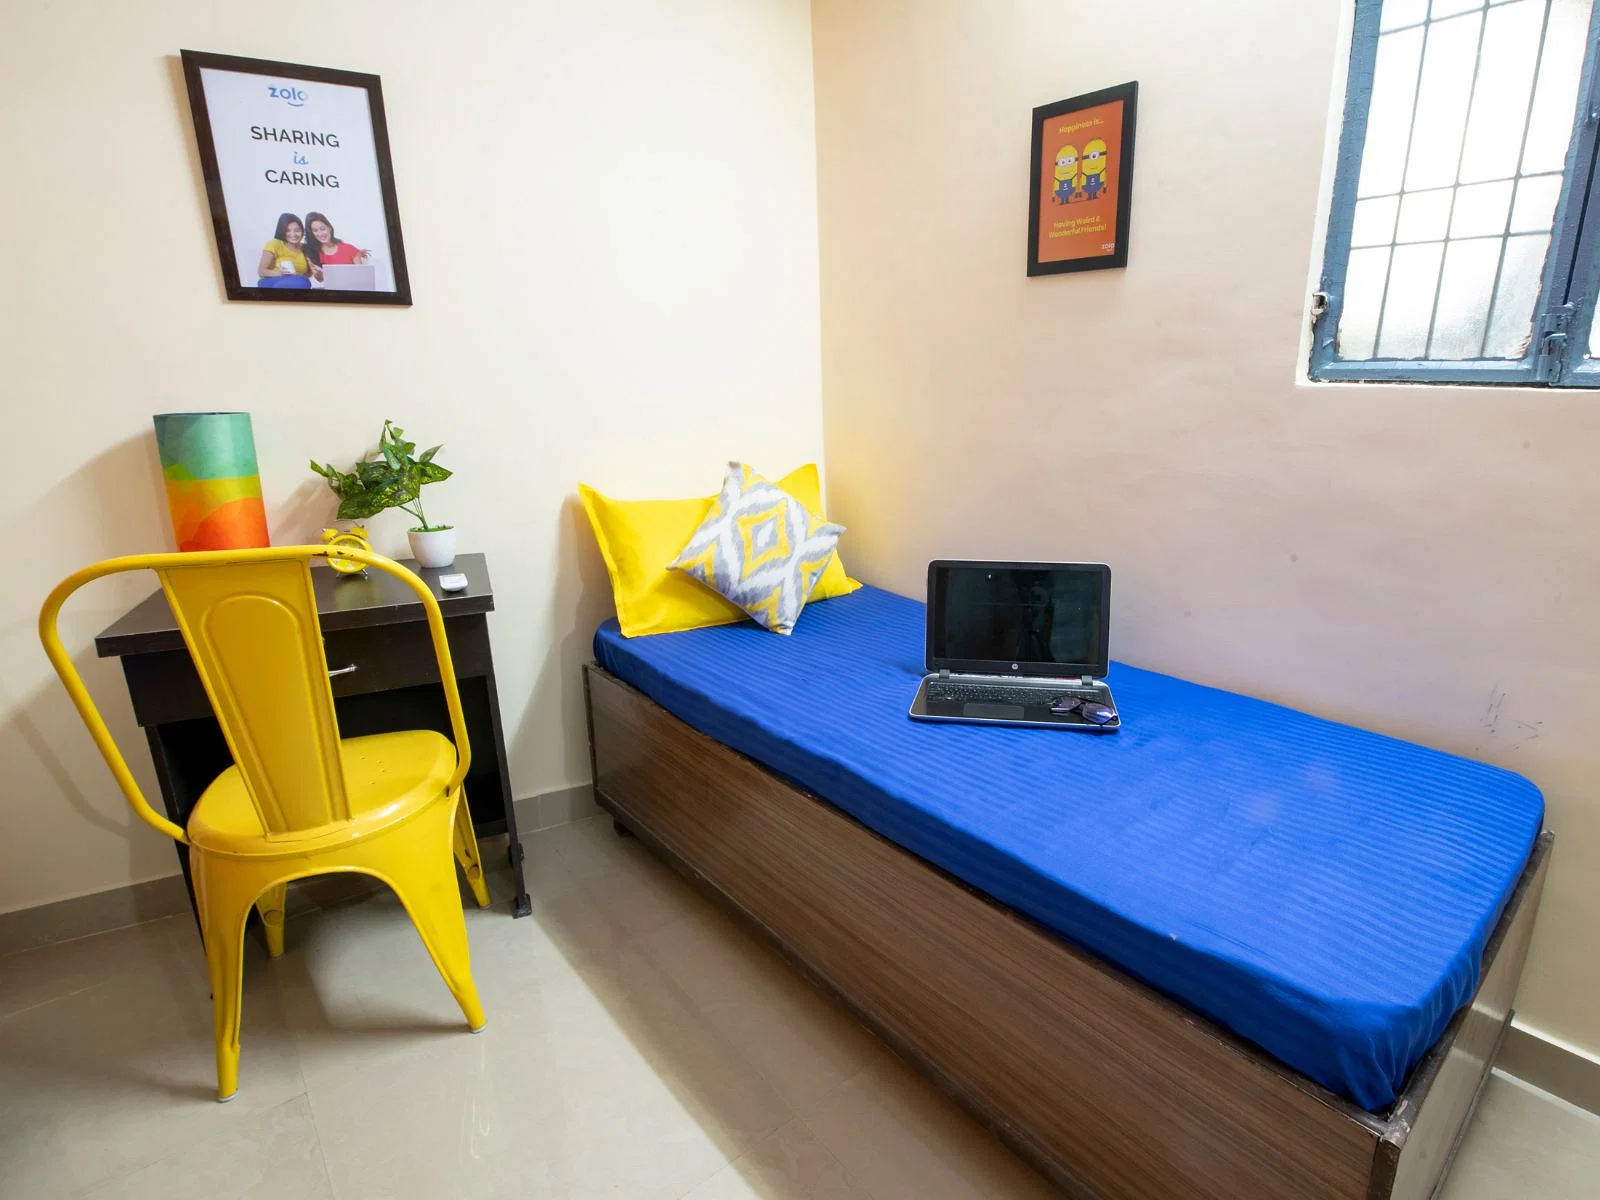 safe and affordable hostels for men students with 24/7 security and CCTV surveillance-Zolo Amigos